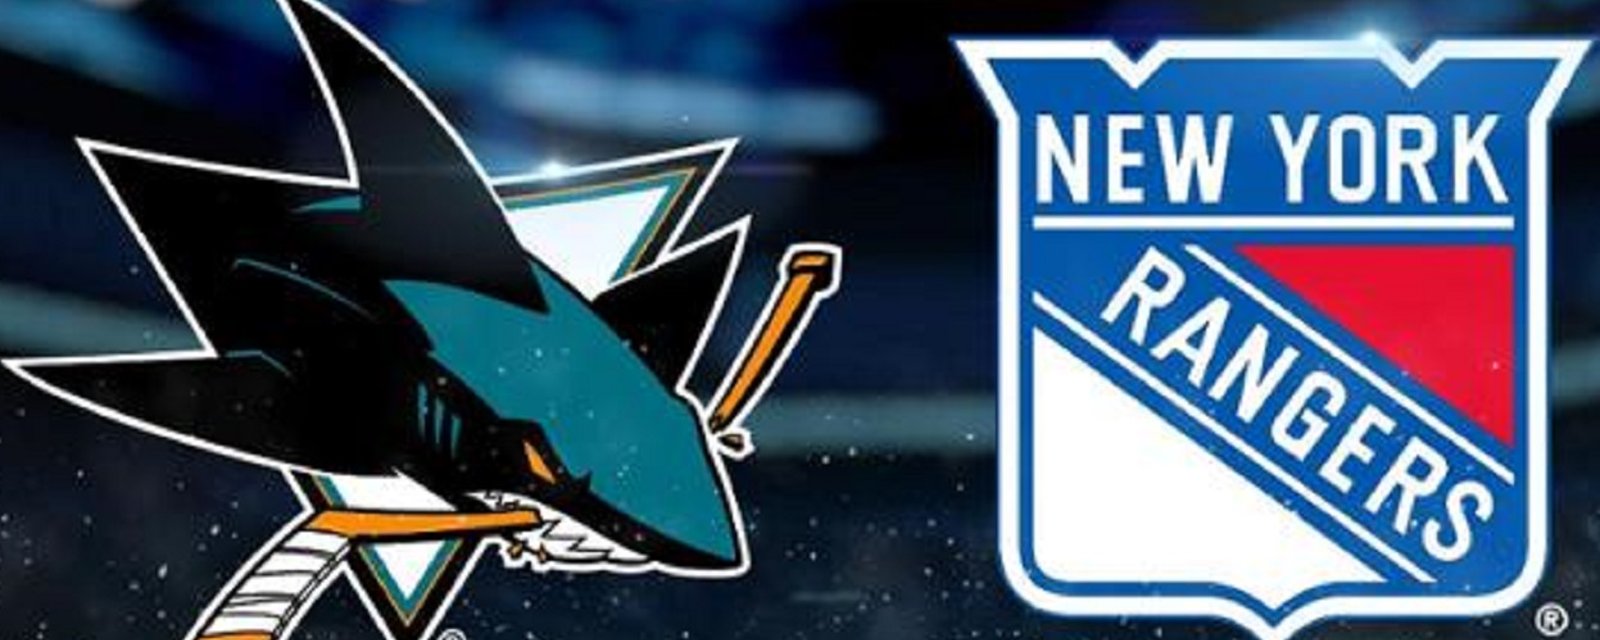 Rumor: Potential player for player trade between the Rangers and Sharks.